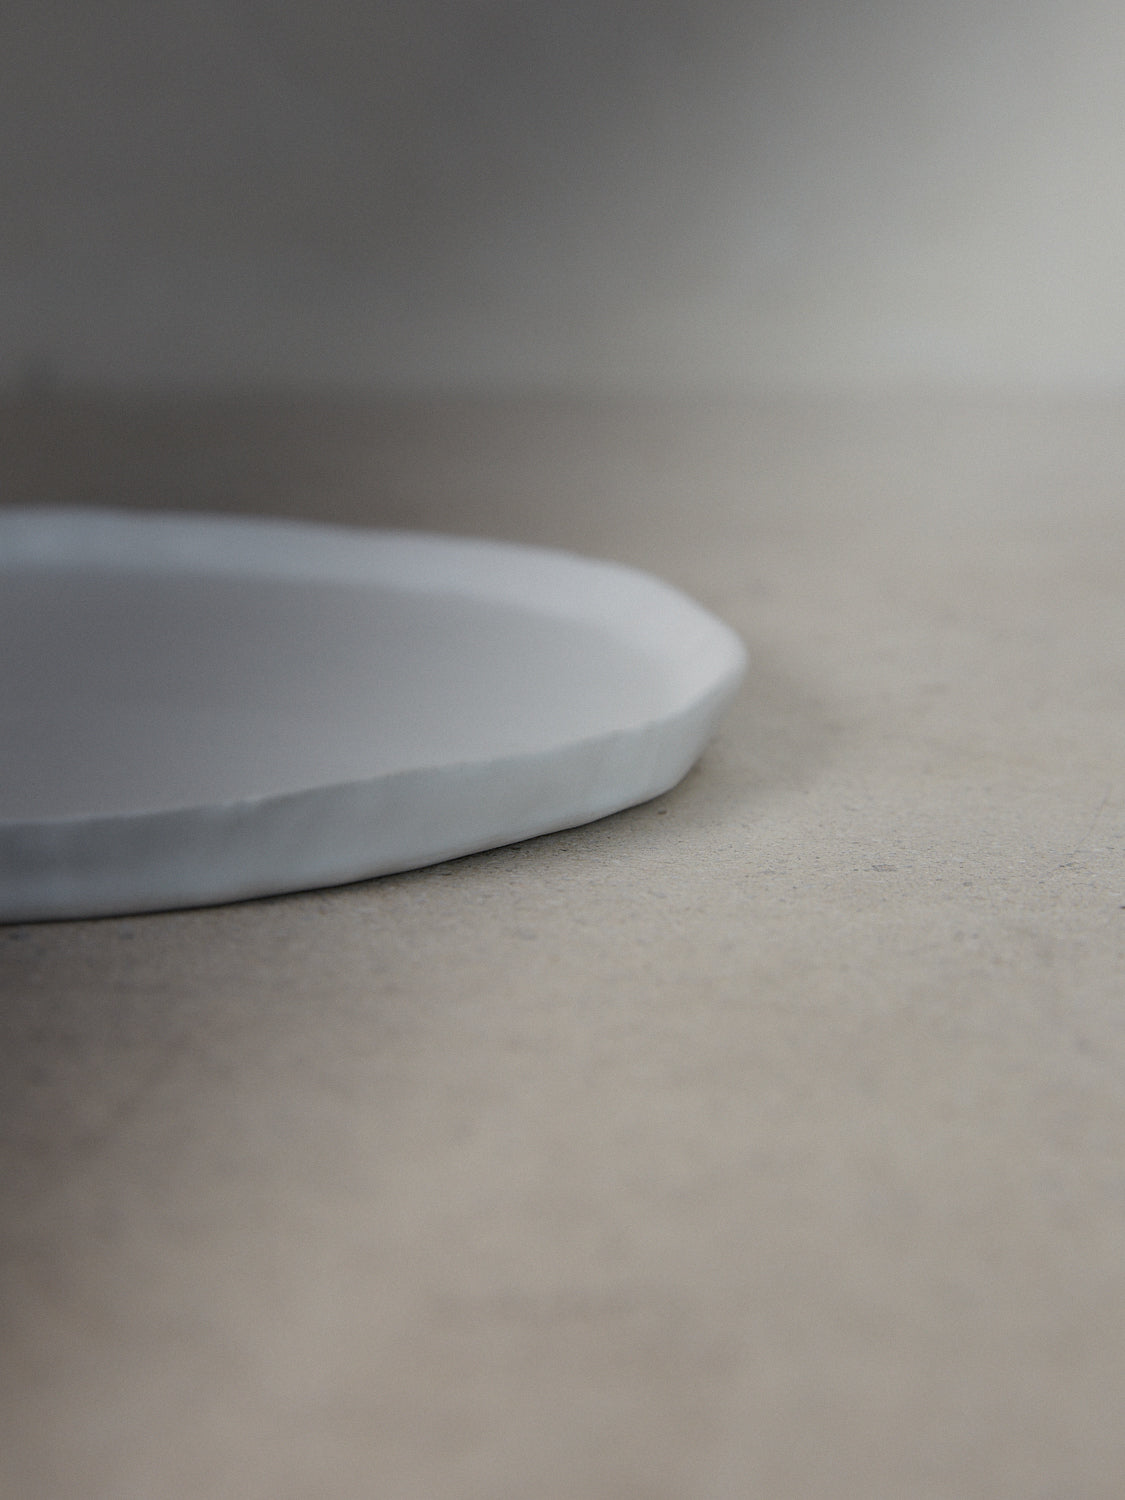 Raw Salad Plate in Ecru. A hand-formed stoneware salad plate recalling the natural world with perfectly imperfect edges in a classic matte white finish.